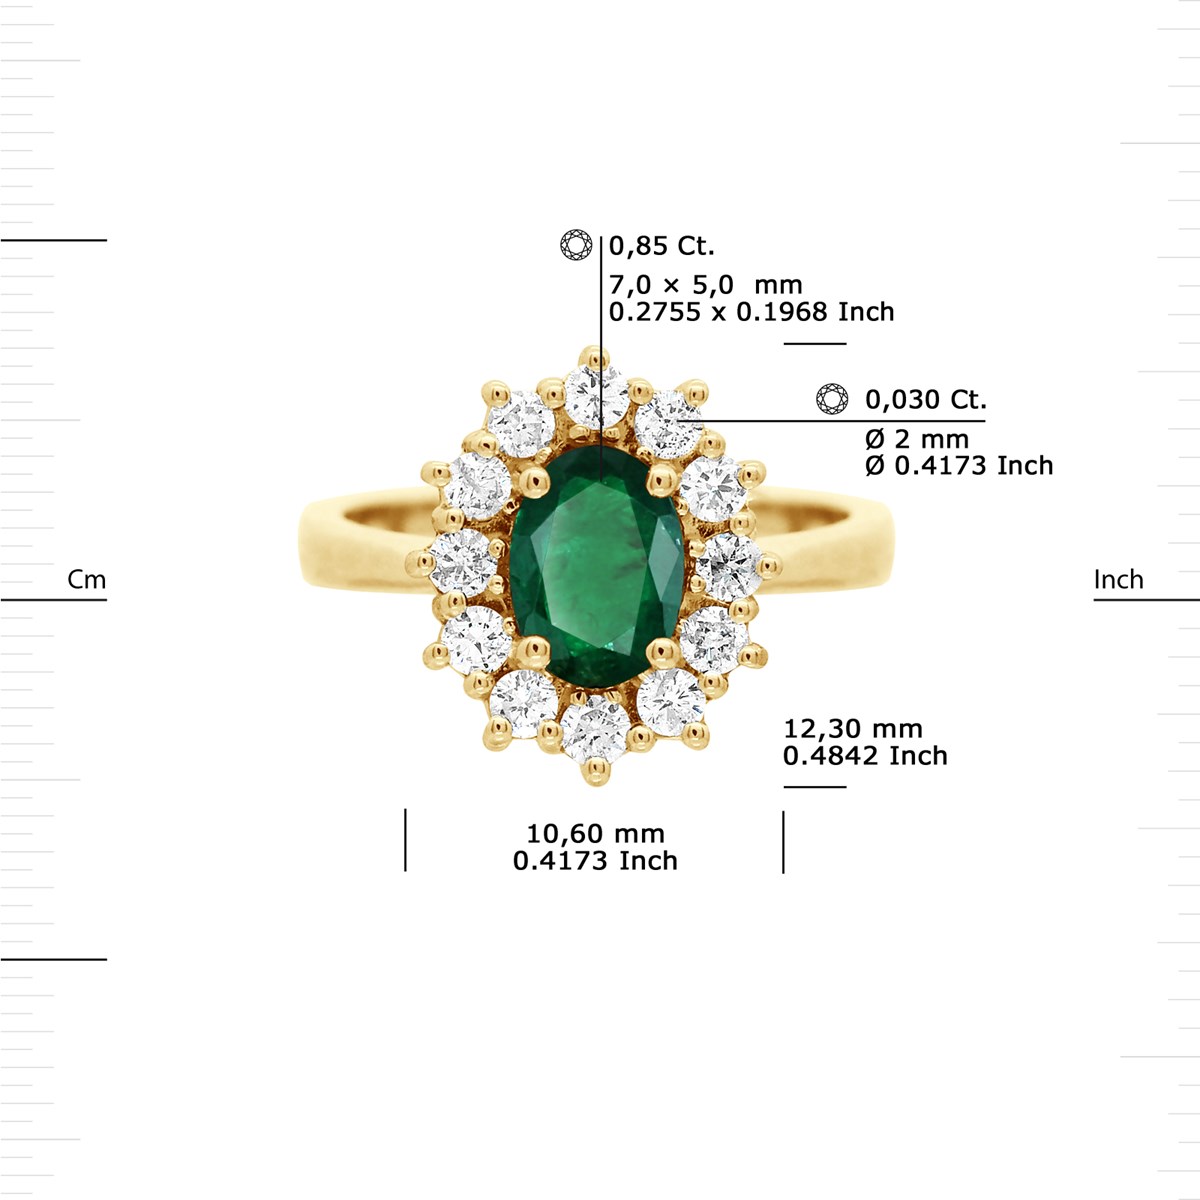 Bague Marquise EMERAUDE 0,85 Cts Diamants 0,36 Cts Or Jaune 18 Carats - vue 3